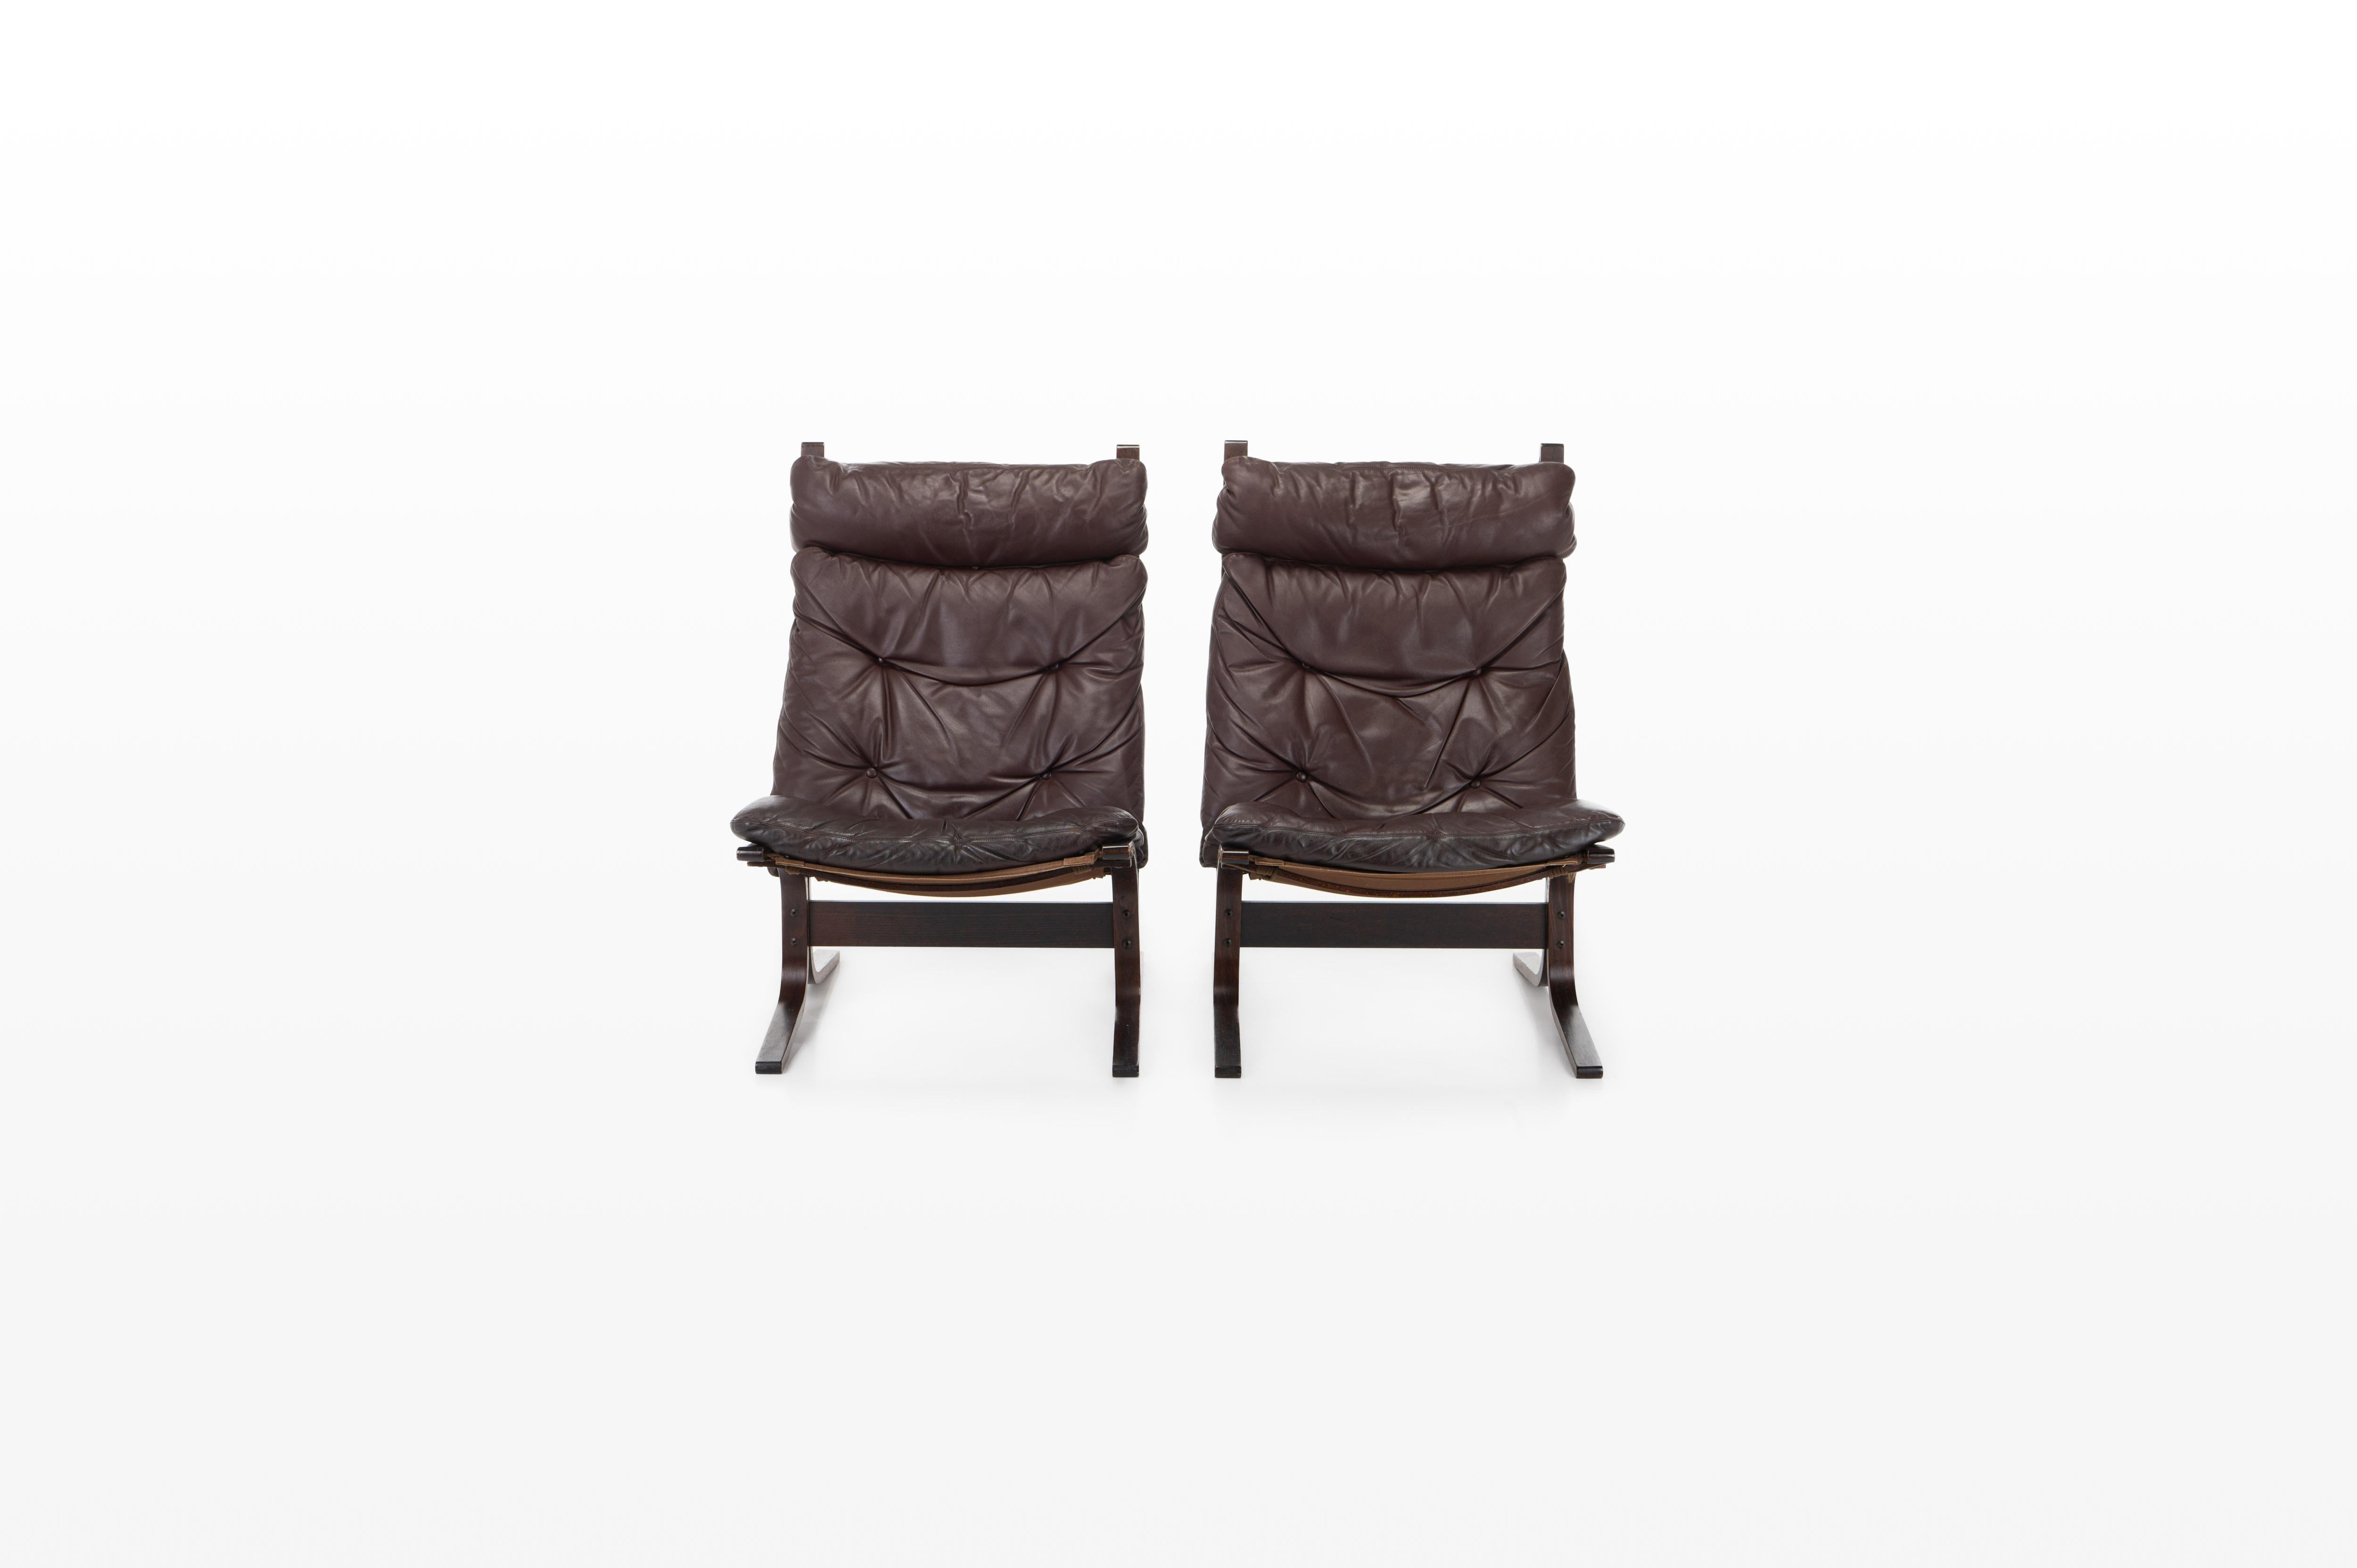 Great pair of vintage ‘Siesta' lounge chairs. This lounge chairs were designed by Ingmar Relling and manufactured by Westnofa, Norway. Bordeaux / brown leather in very good original condition.